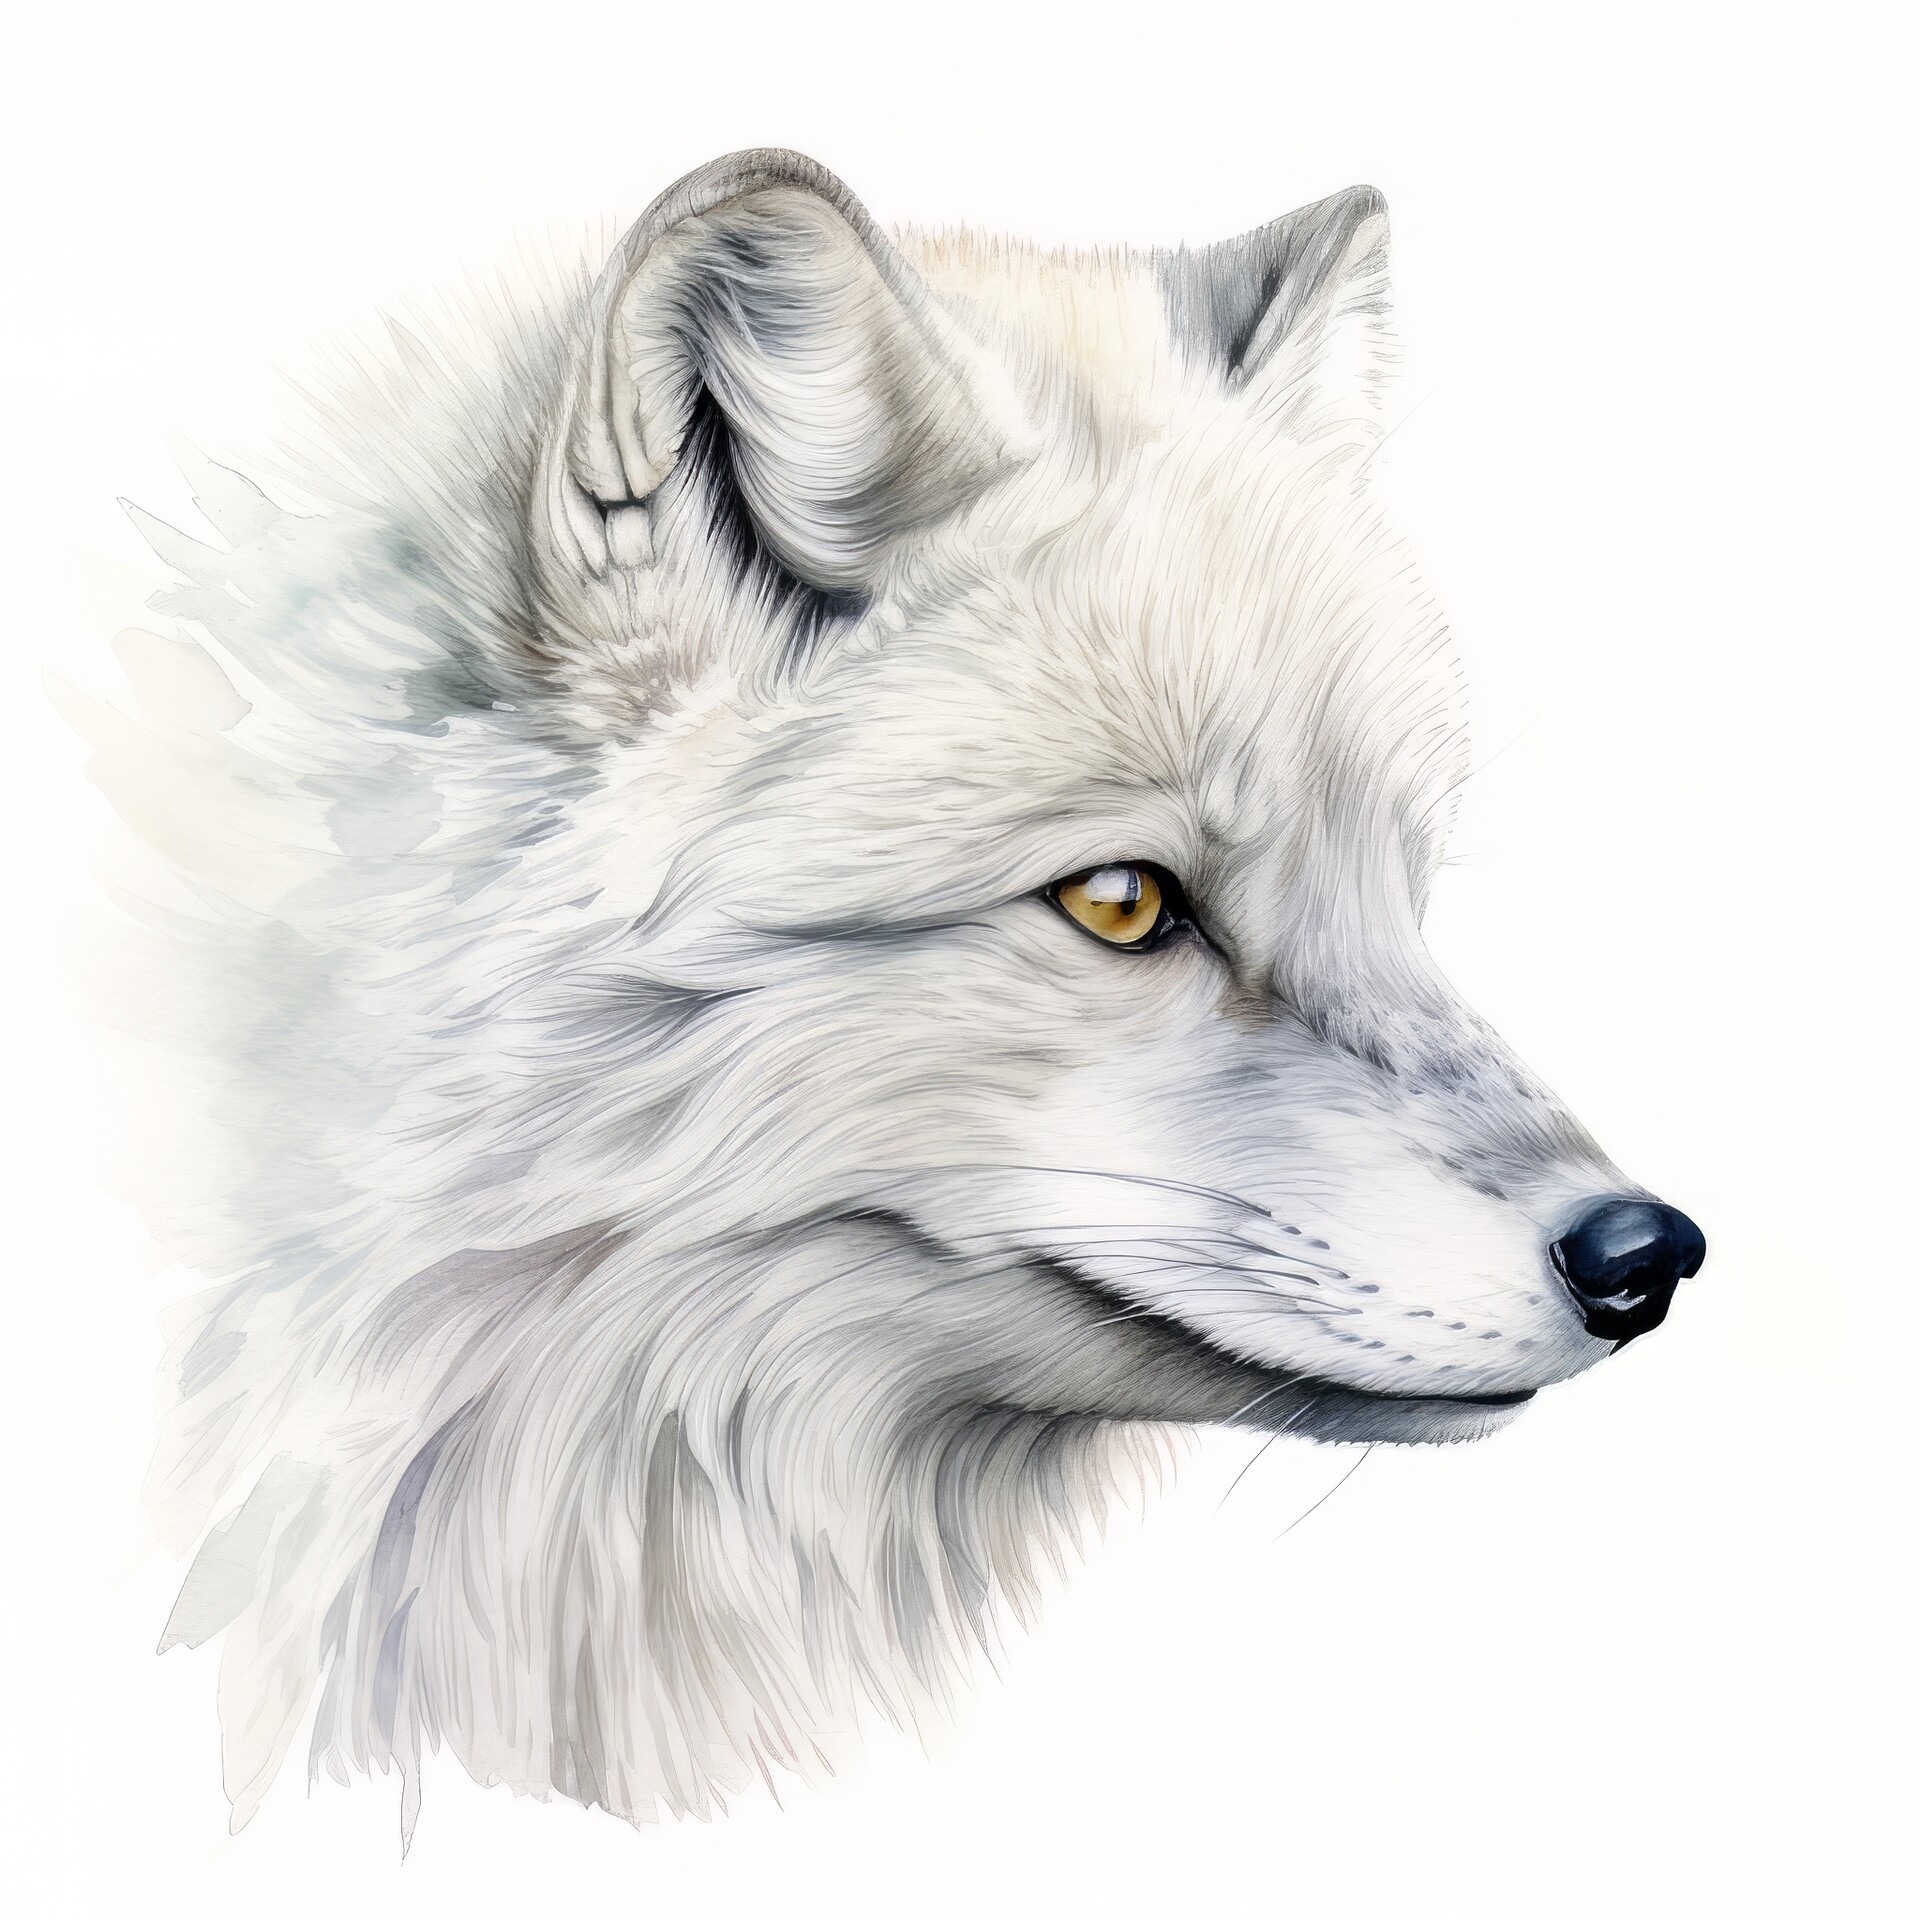 A simple guide to drawing an Arctic Fox with Jonathan Newey